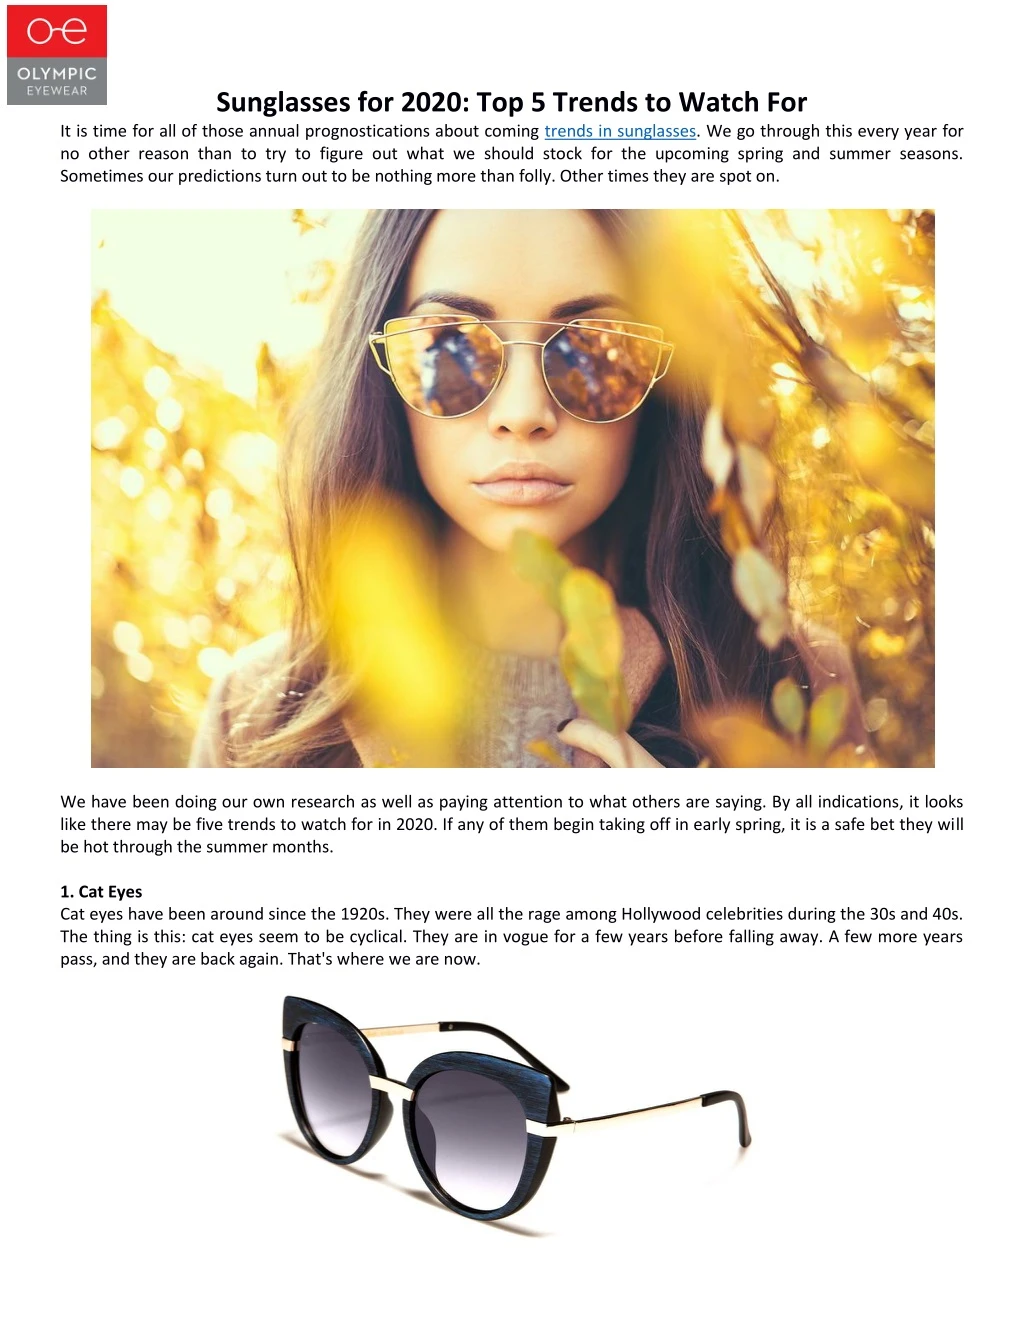 sunglasses for 2020 top 5 trends to watch